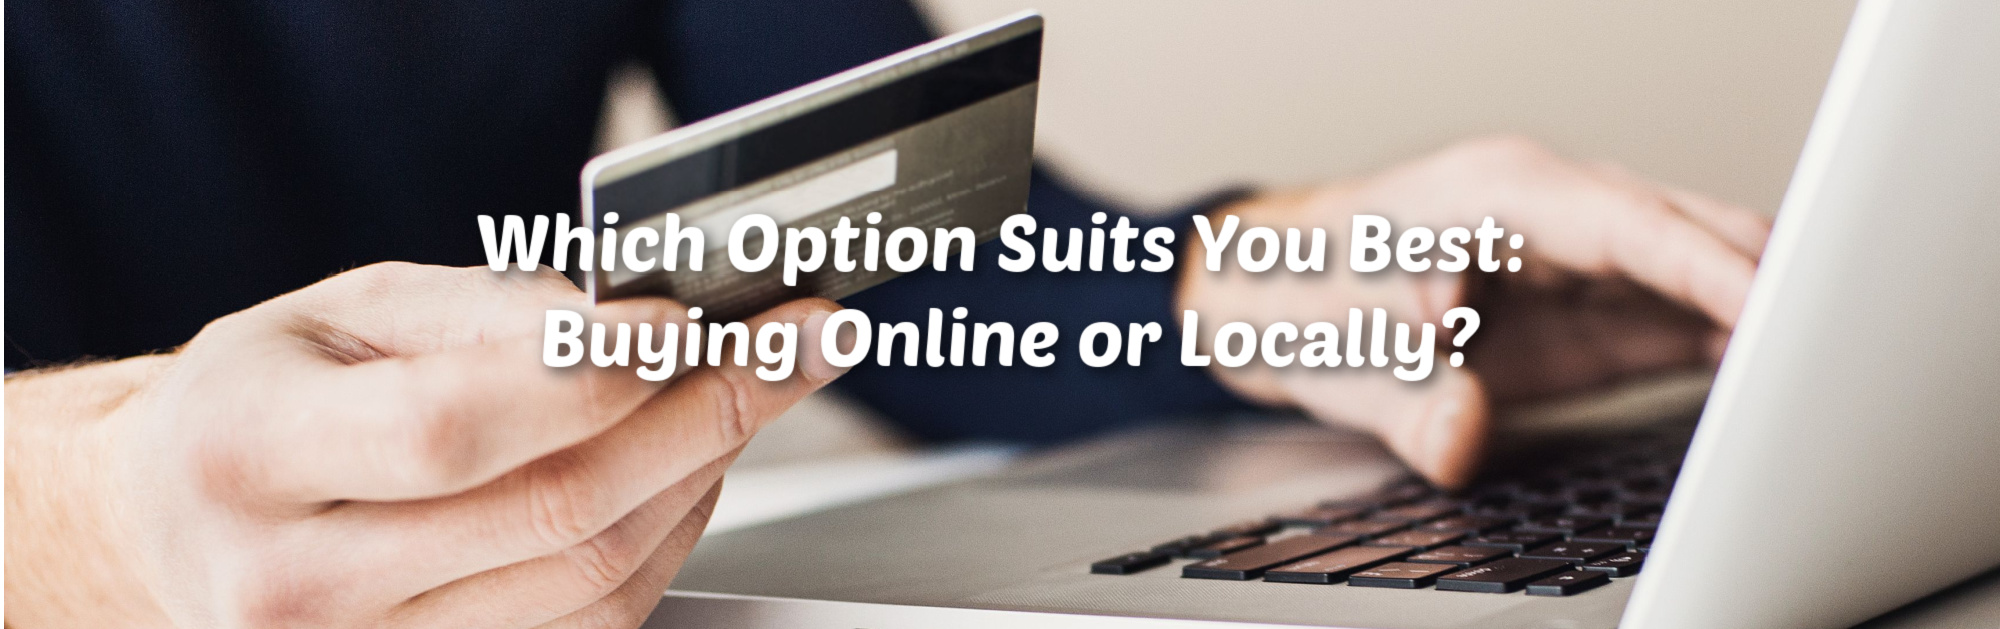 image of which option suits you best buying online or locally